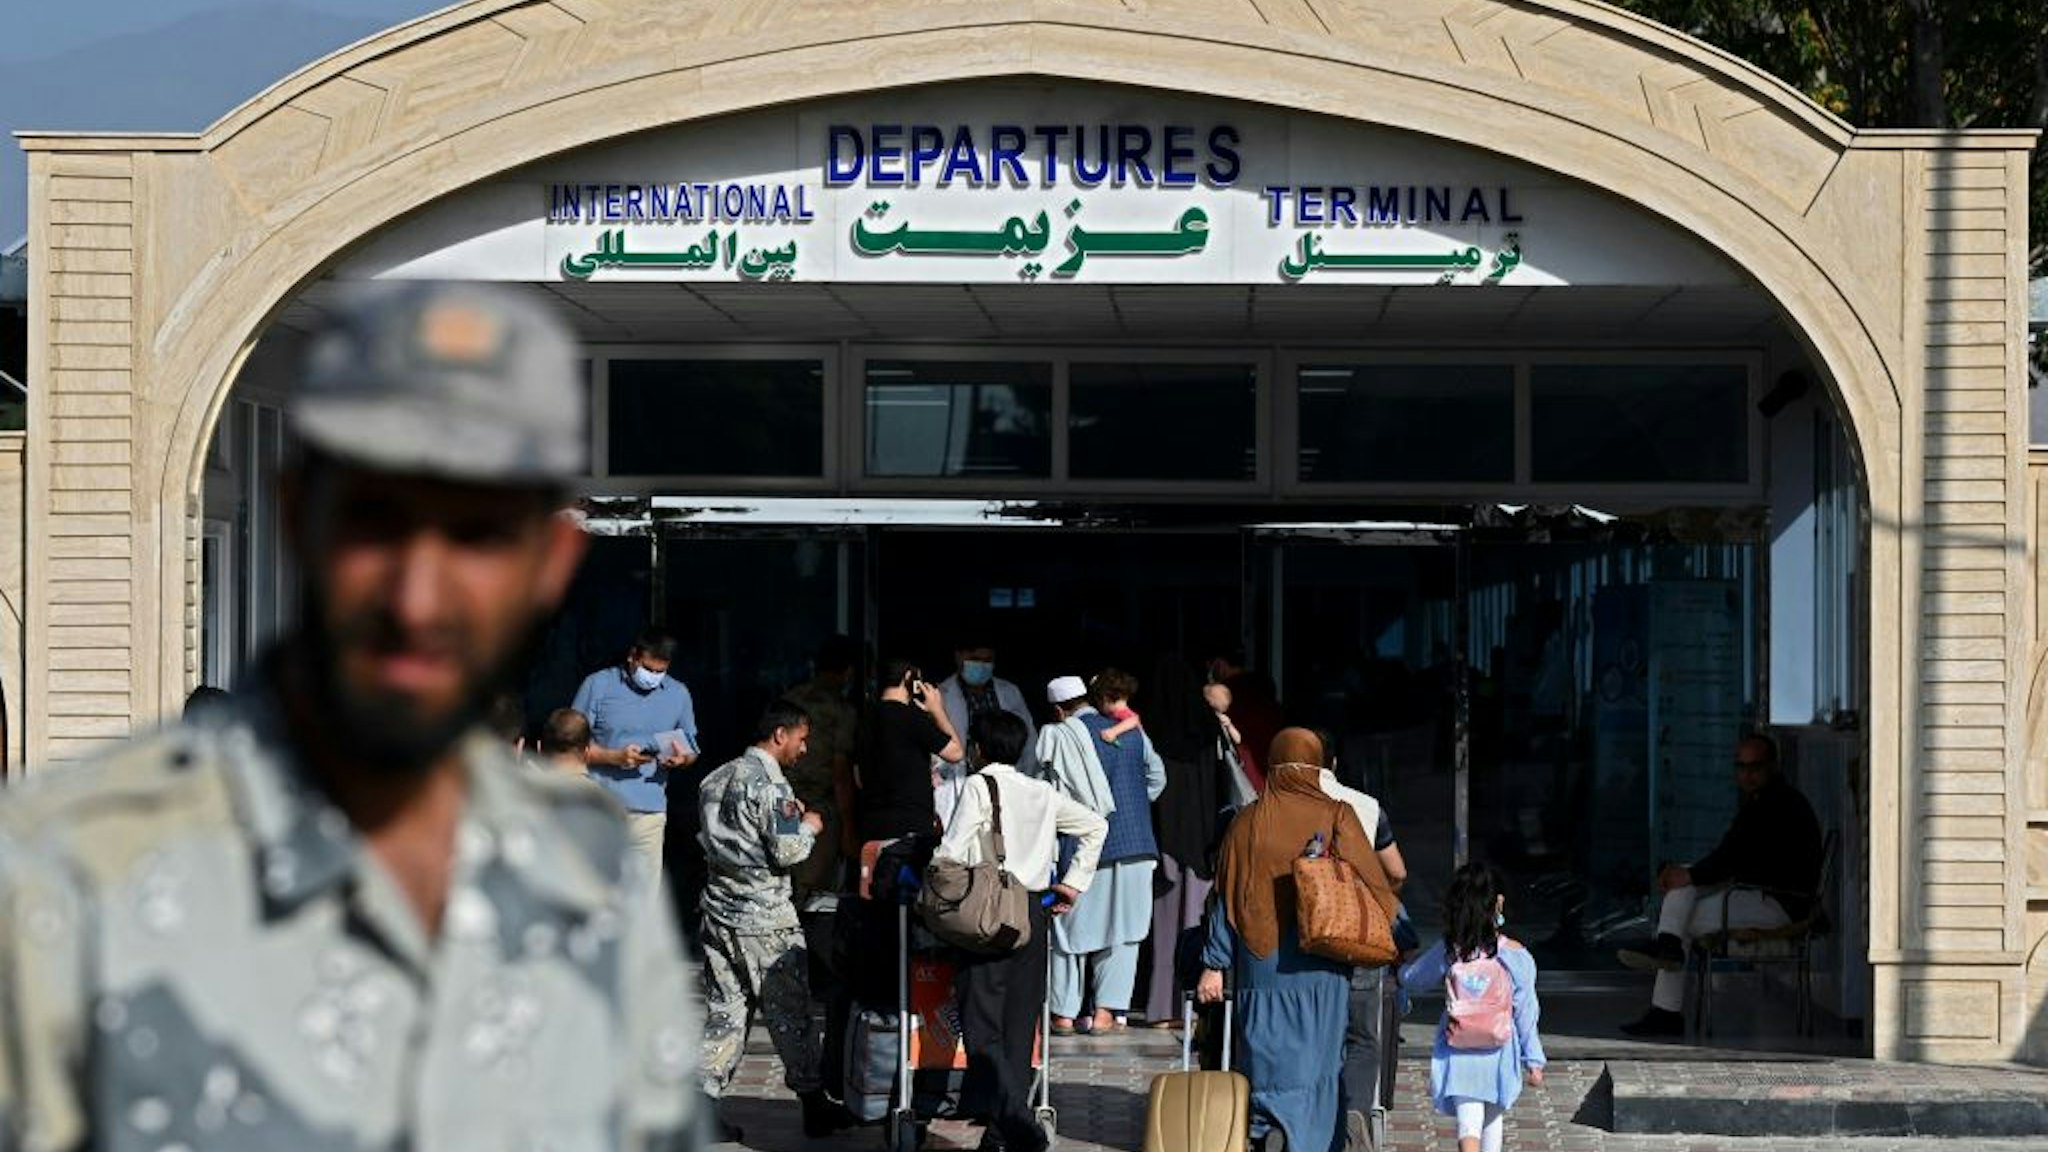 Passengers enter the departures terminal of the Hamid Karzai International Airport in Kabul on July 17, 2021. (Photo by SAJJAD HUSSAIN / AFP) (Photo by SAJJAD HUSSAIN/AFP via Getty Images)